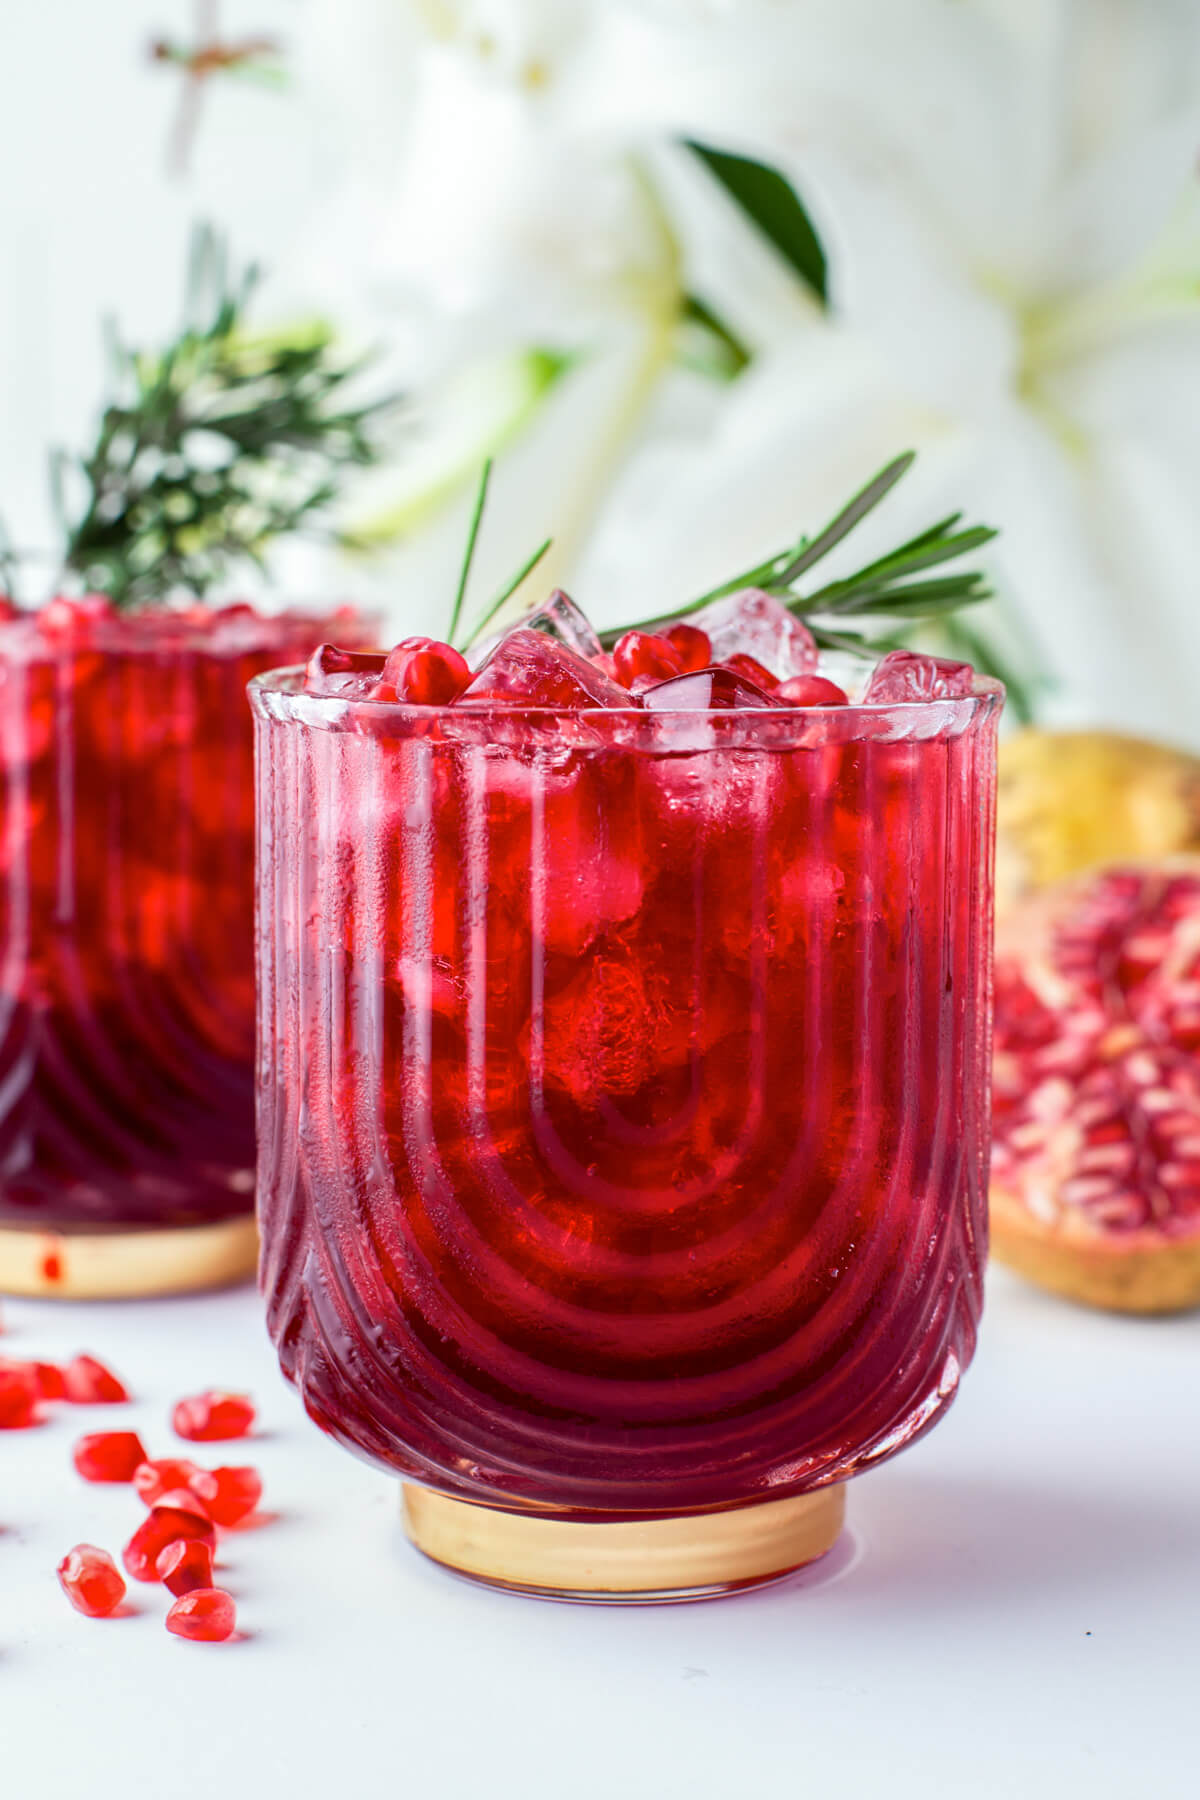 Two stunning rub red cocktails in rocks glasses garnished with pomegranate arils and a sprig of rosemary.